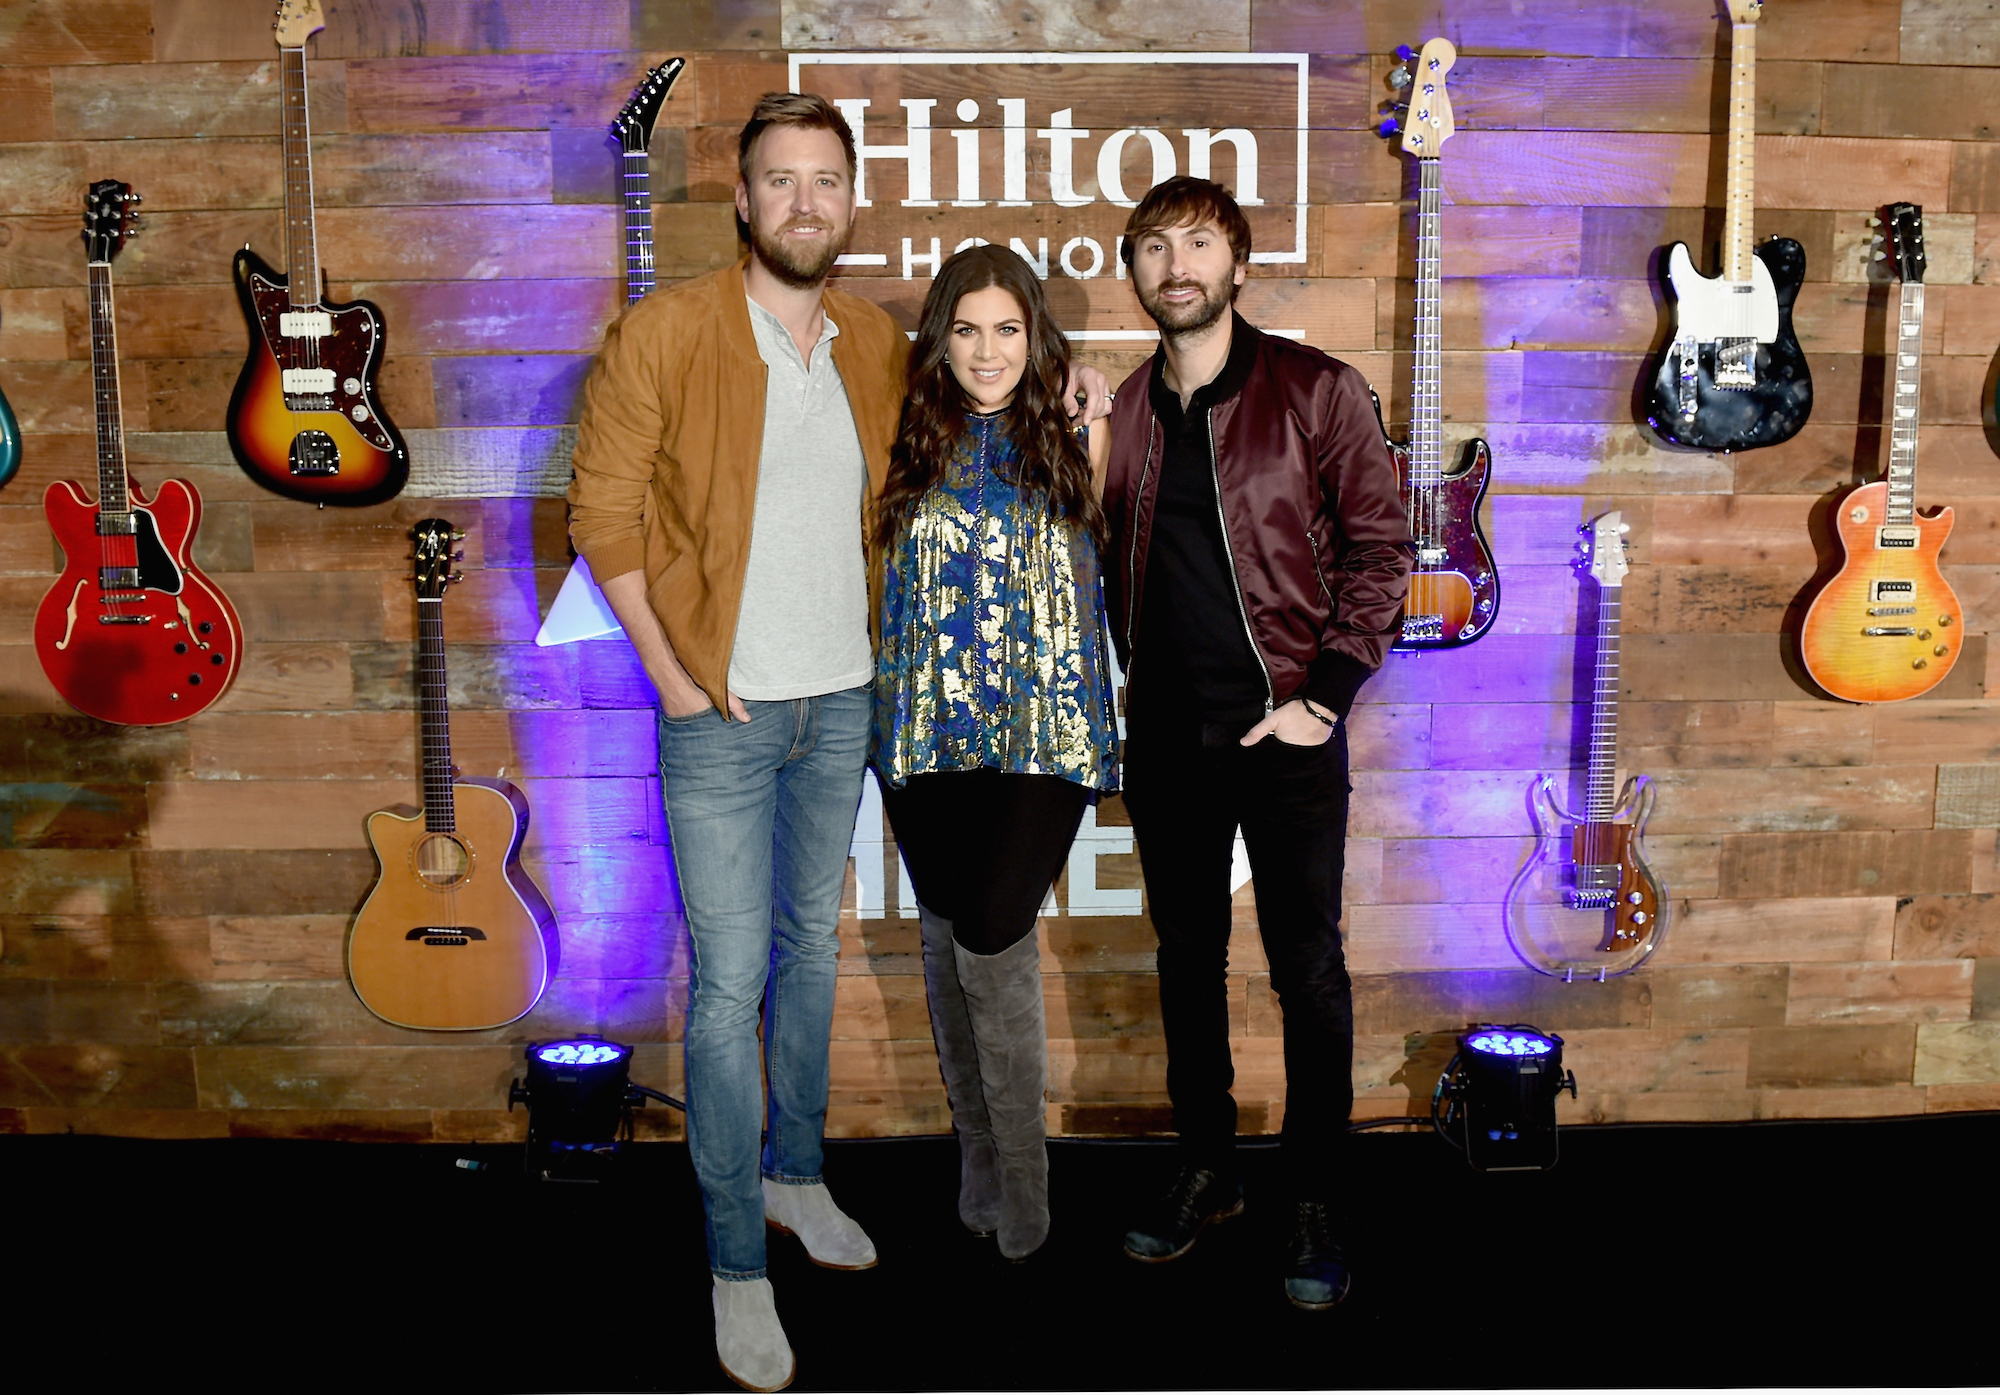 Lady Antebellum “Owned The Night” at Music Happens Here Show with Hilton Honors